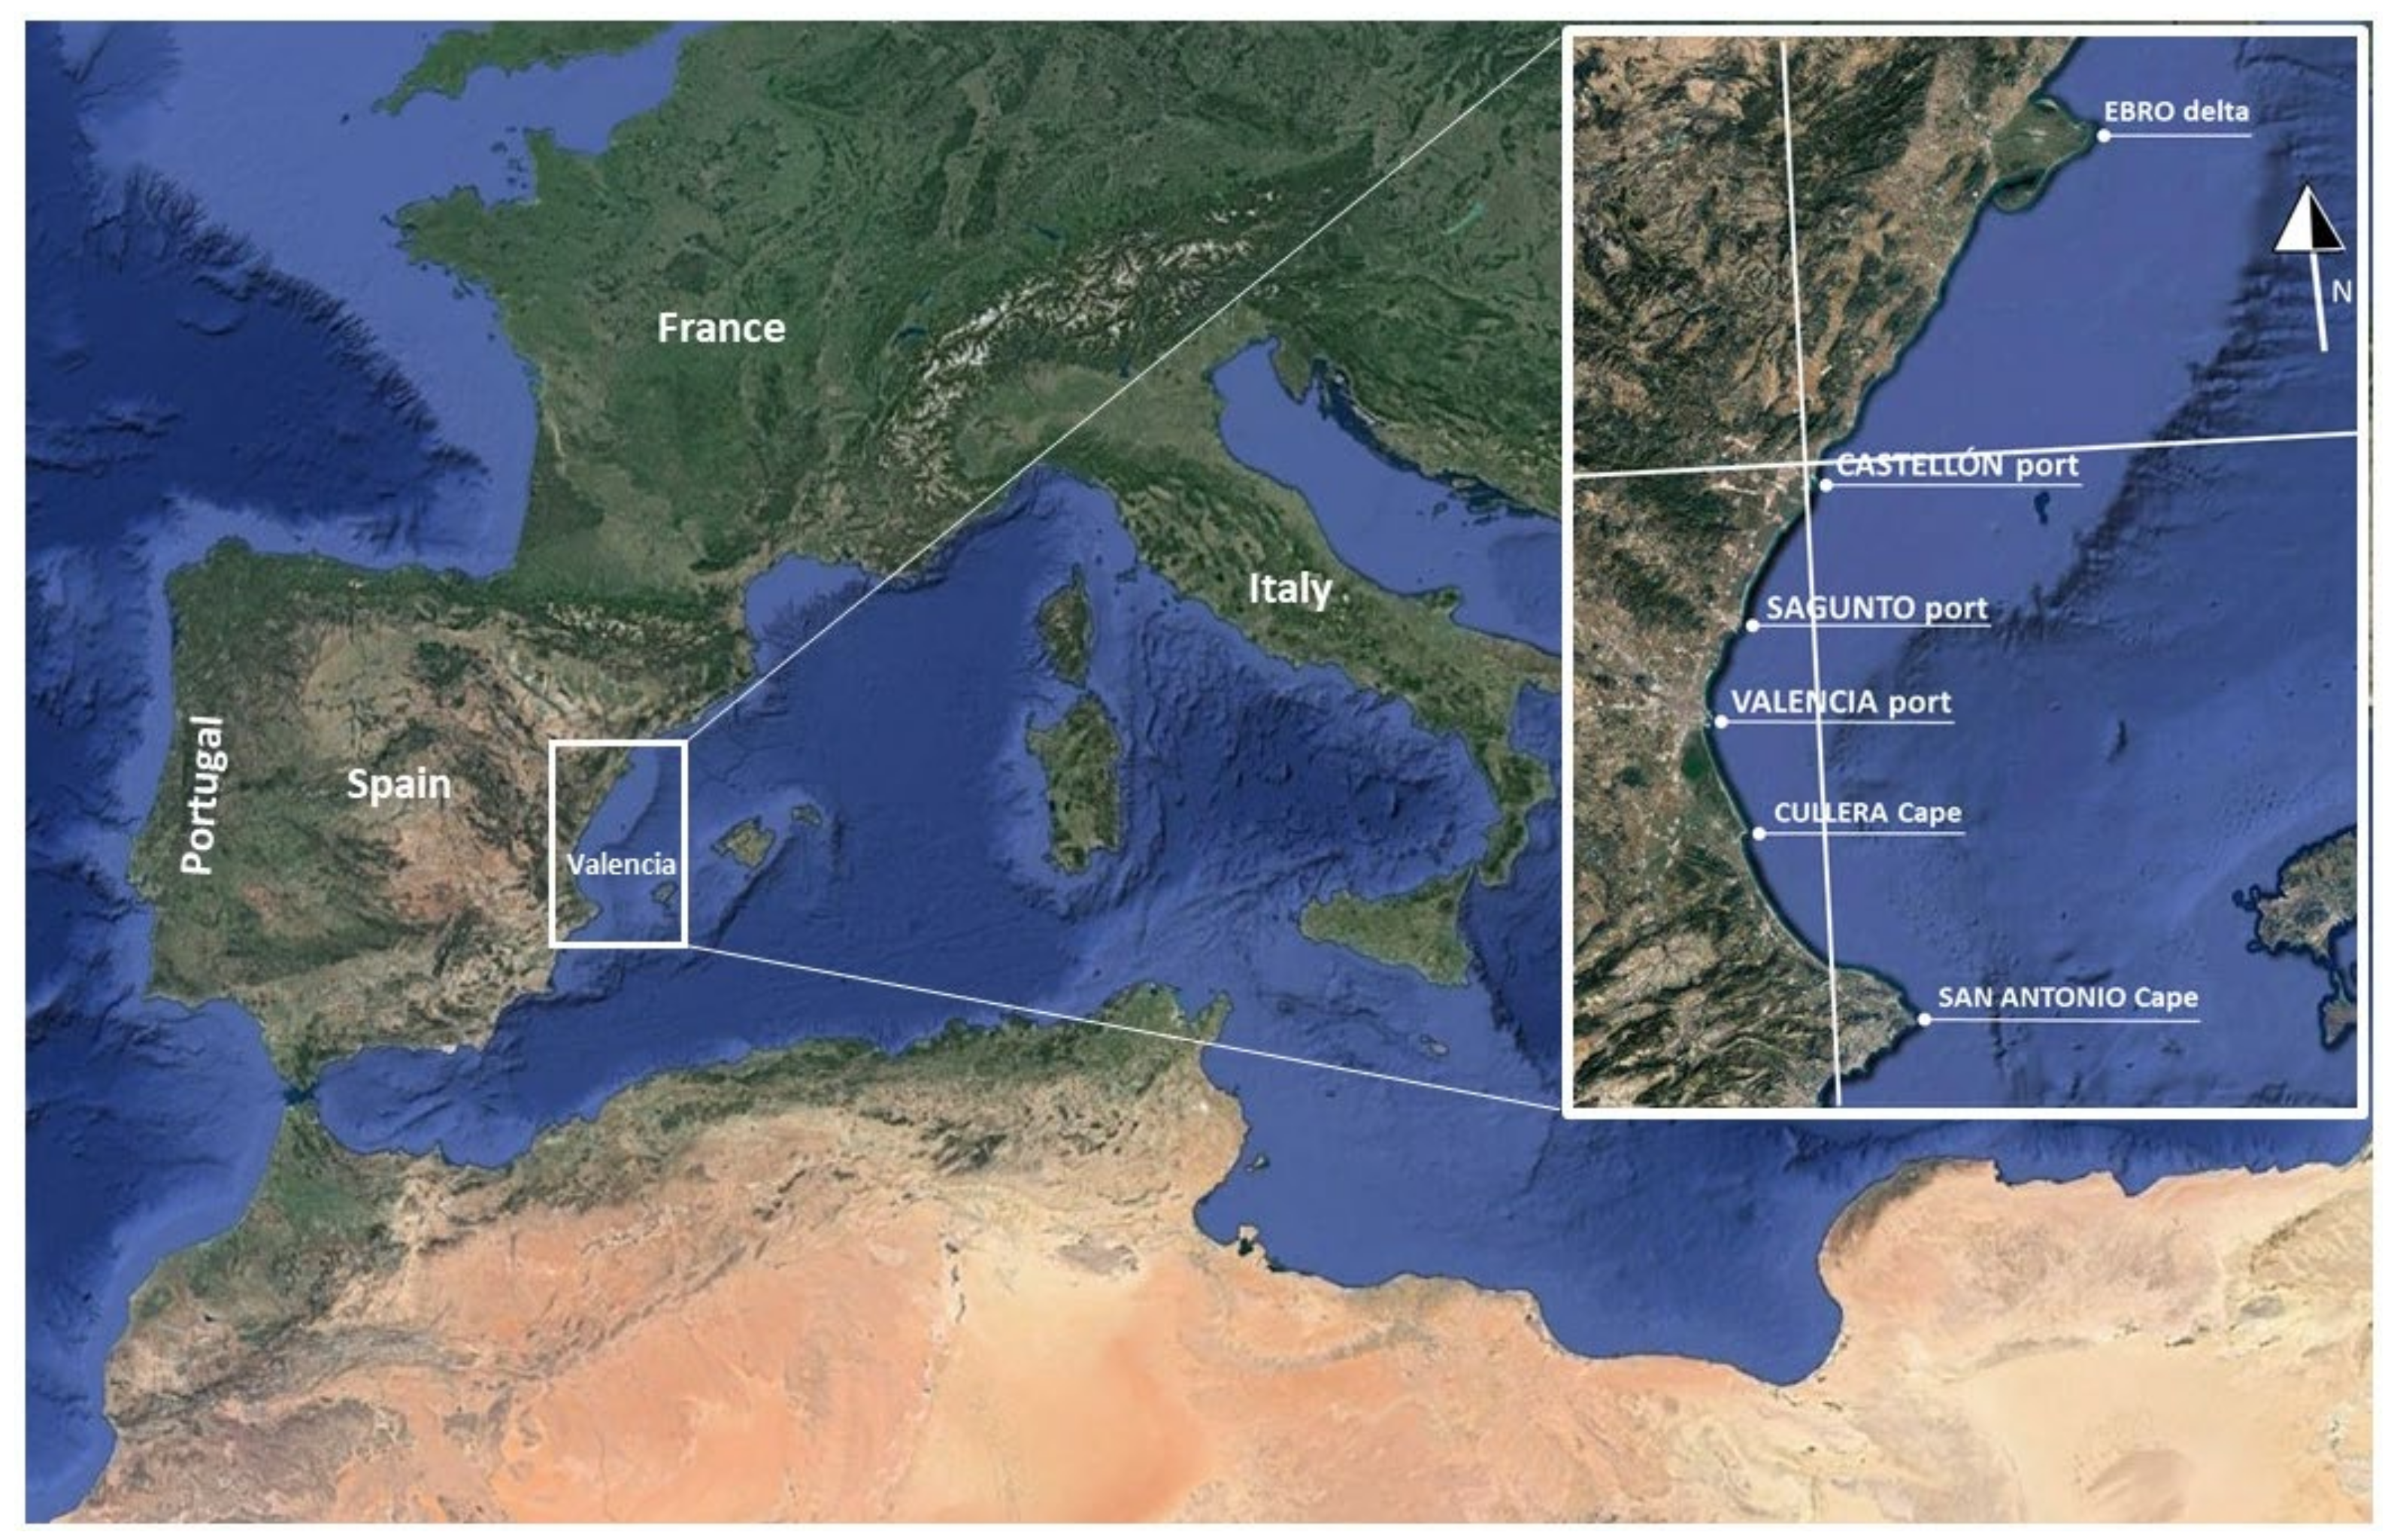 IJERPH | Free Full-Text | Coastal Monitoring Using Unmanned Aerial Vehicles  (UAVs) for the Management of the Spanish Mediterranean Coast: The Case of  Almenara-Sagunto